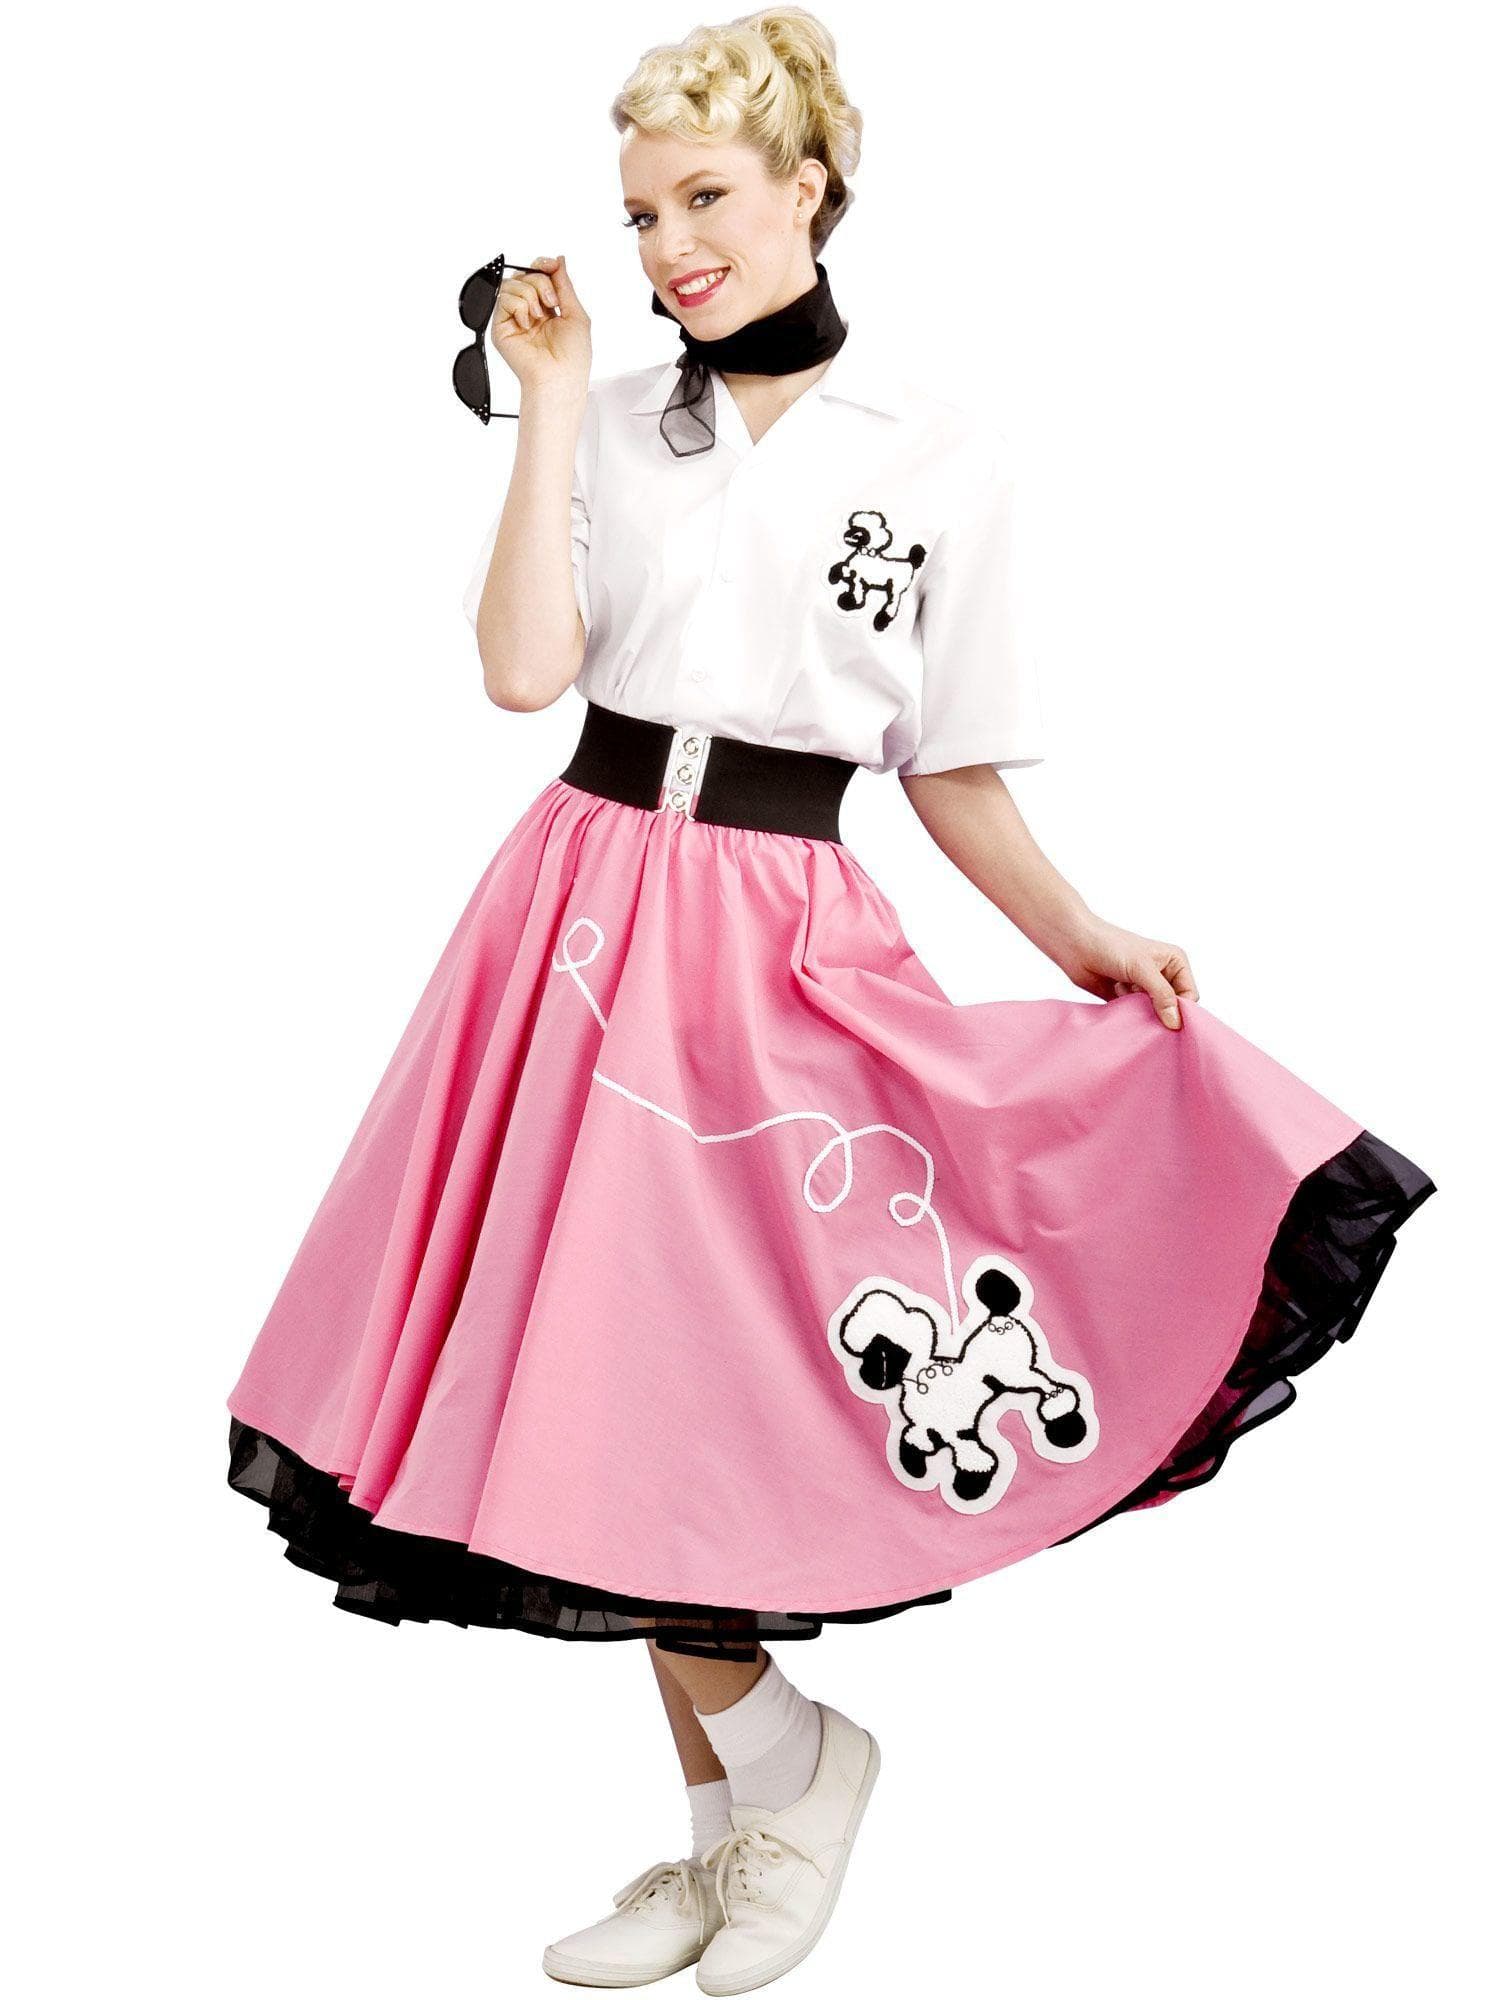 Adult Pink 50s Poodle Costume - costumes.com